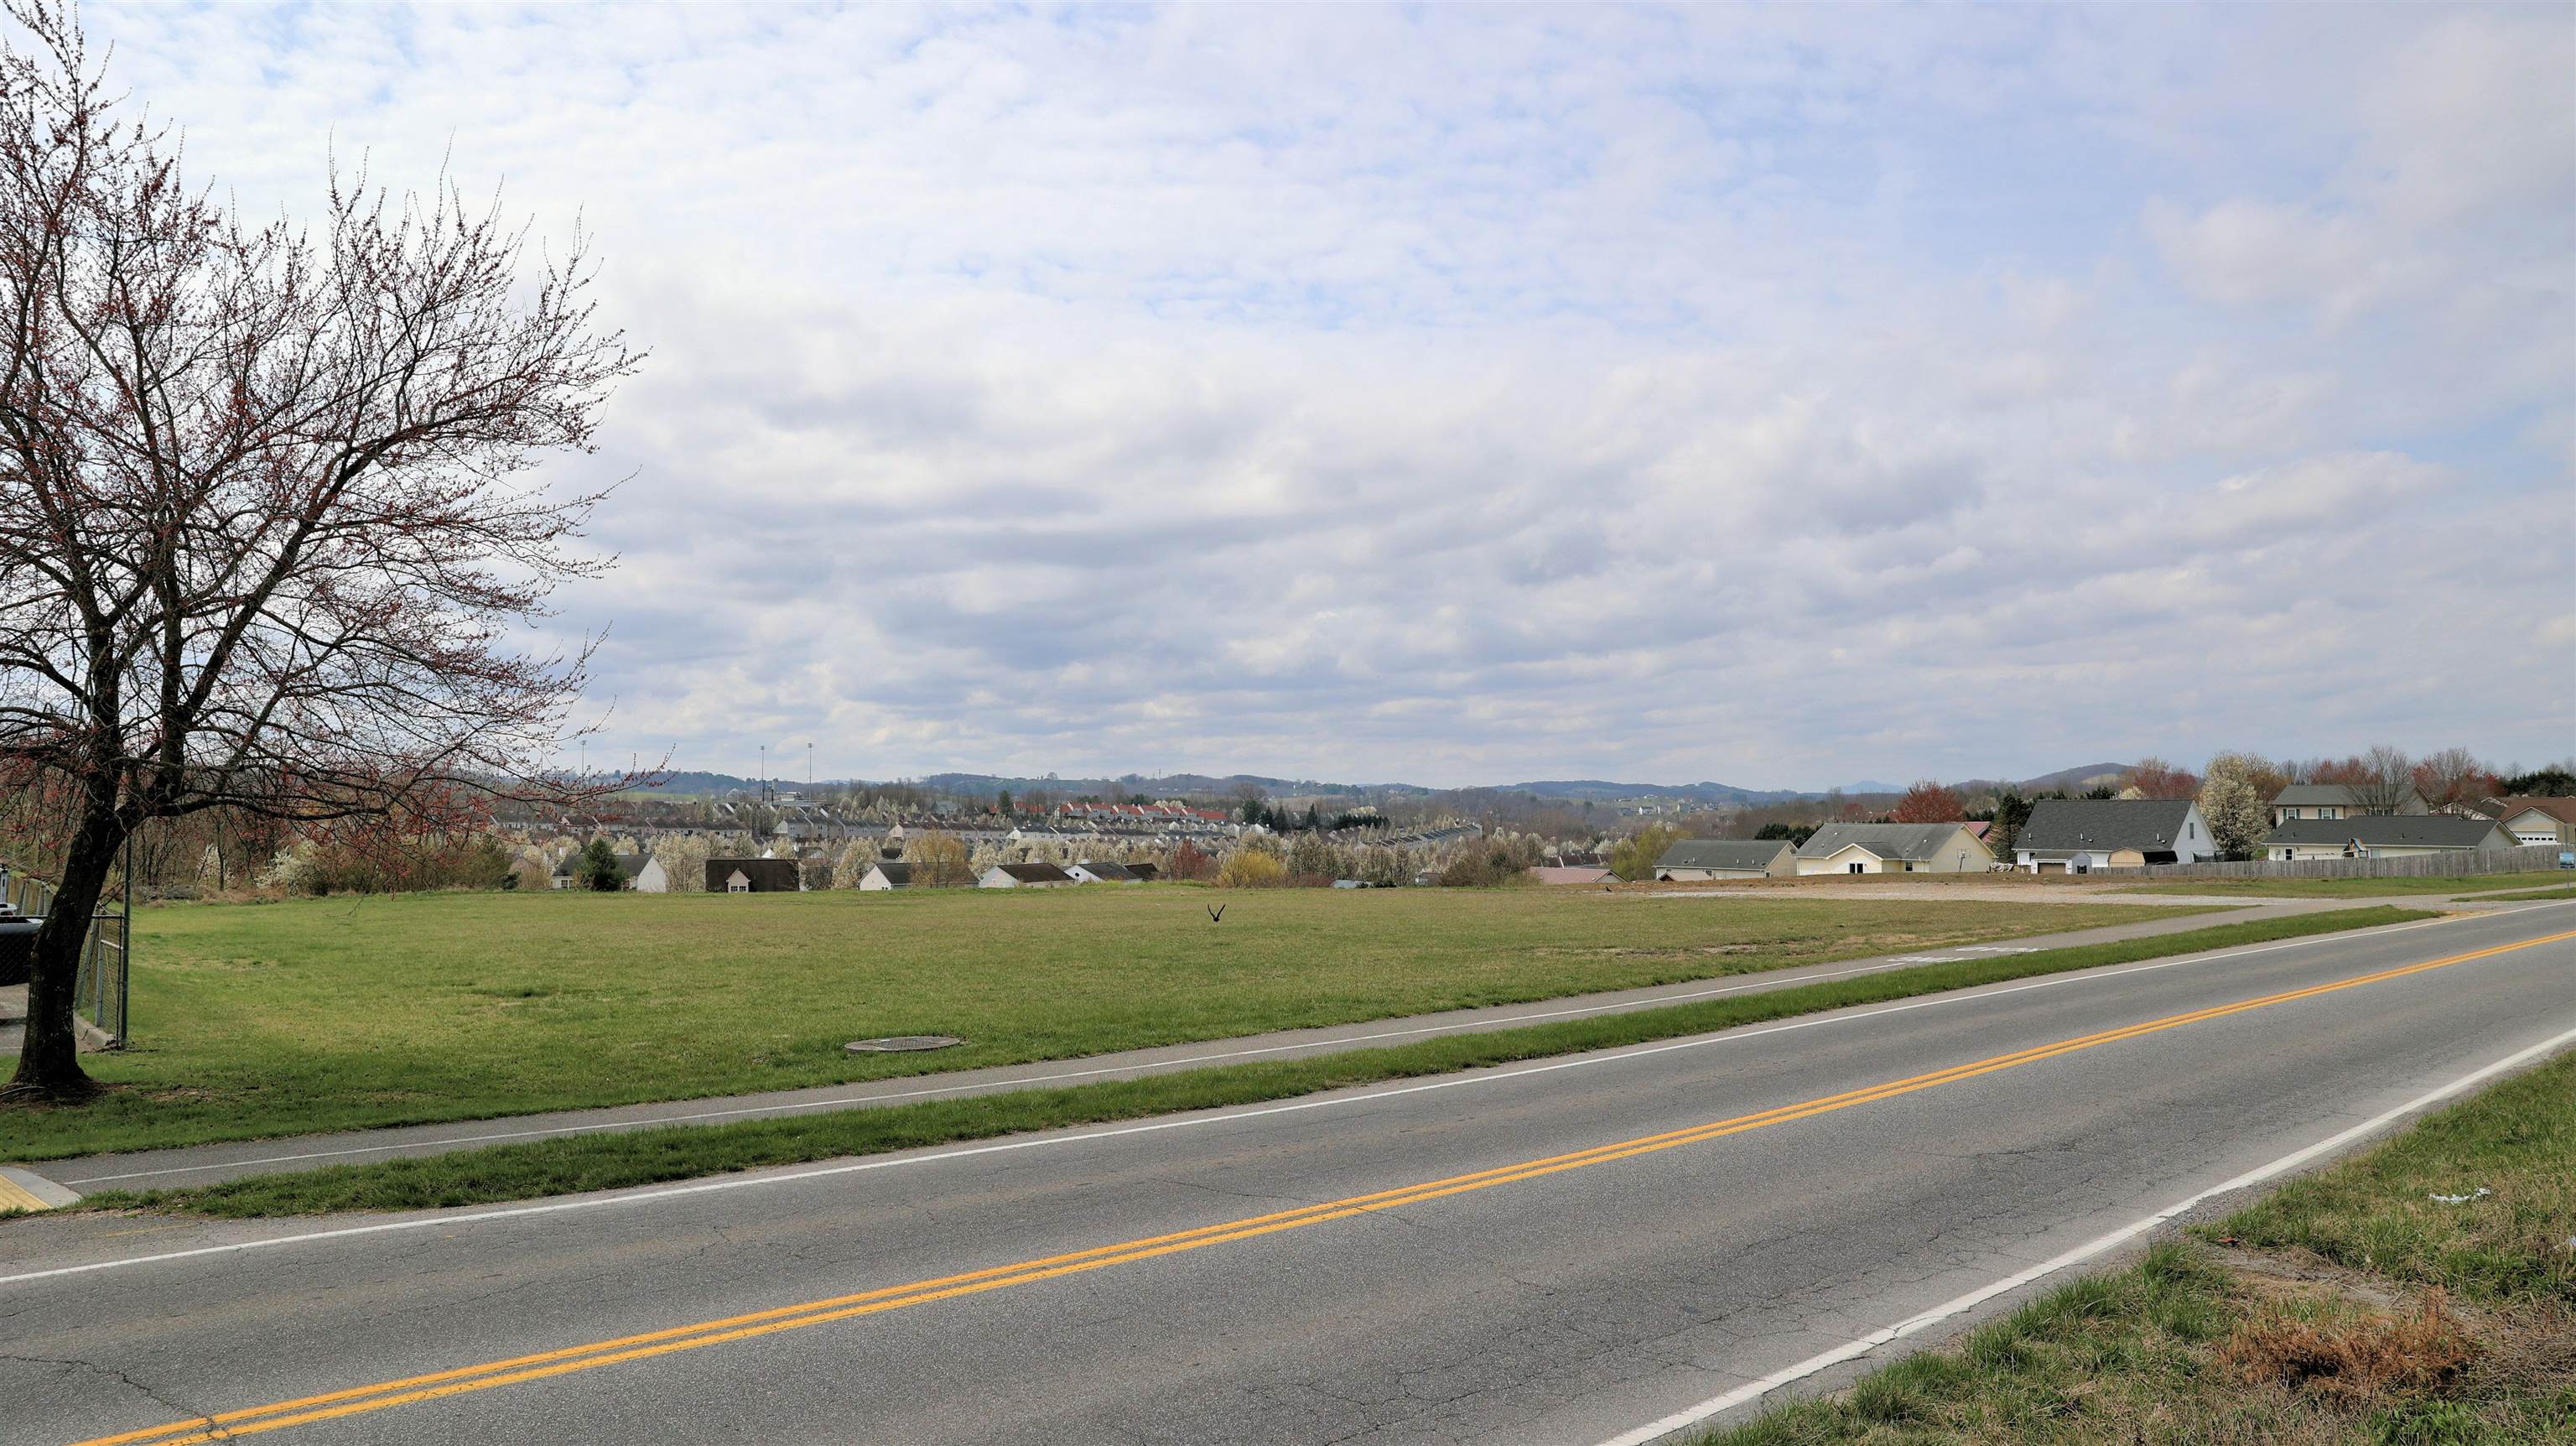 Great 2.314 acre lot (LOT 2) with B3 General Business Zoning for your new business located in the Town of Christiansburg right beside the Christiansburg Rec Center and minutes to I-81, downtown Christiansburg, Blacksburg and VT.  Located on Cambria Street, a very busy street with great traffic counts and it is also the main entrance to Windmill Hills, Diamond Pointe and to most of Oak Tree townhomes, the possibilities are endless! There also is an adjoining 2.527 acre lot for sale too for a total of almost 5 acres together! Call for a more information or a private showing today!